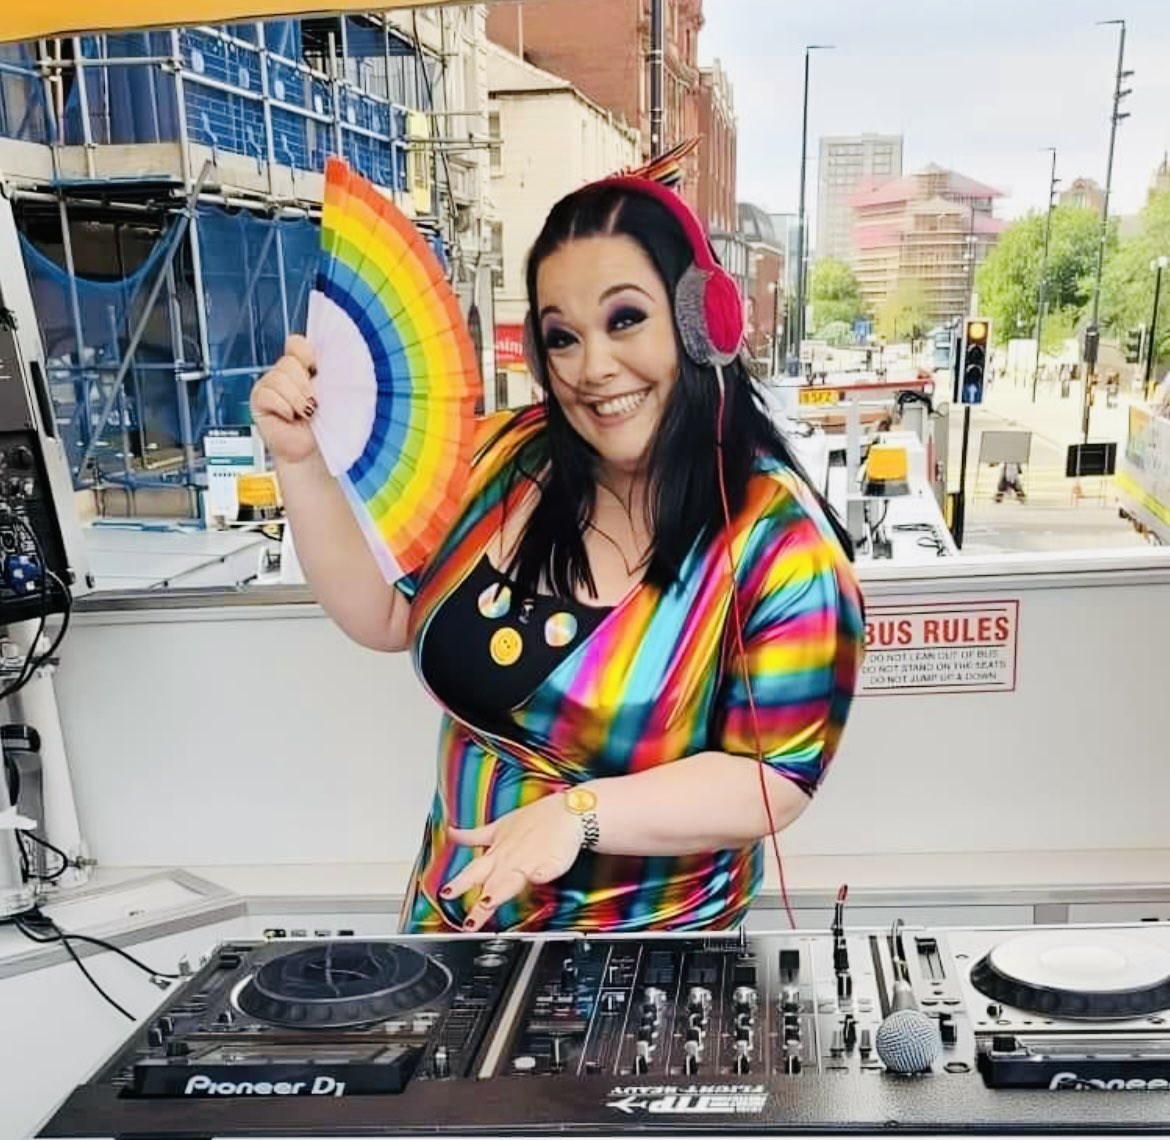 GREAT MEMORIES….🌈🌈🌈 Two Years ago at @LeedsPride being allowed to DJ on our @emmerdale FUN-BUS!!!! What a fantastic day, with such gorgeous people 💛💛💛 #pride #dj #leeds #emmerdale #funbus #friends #memories #rainbow 🚌🚌🚌